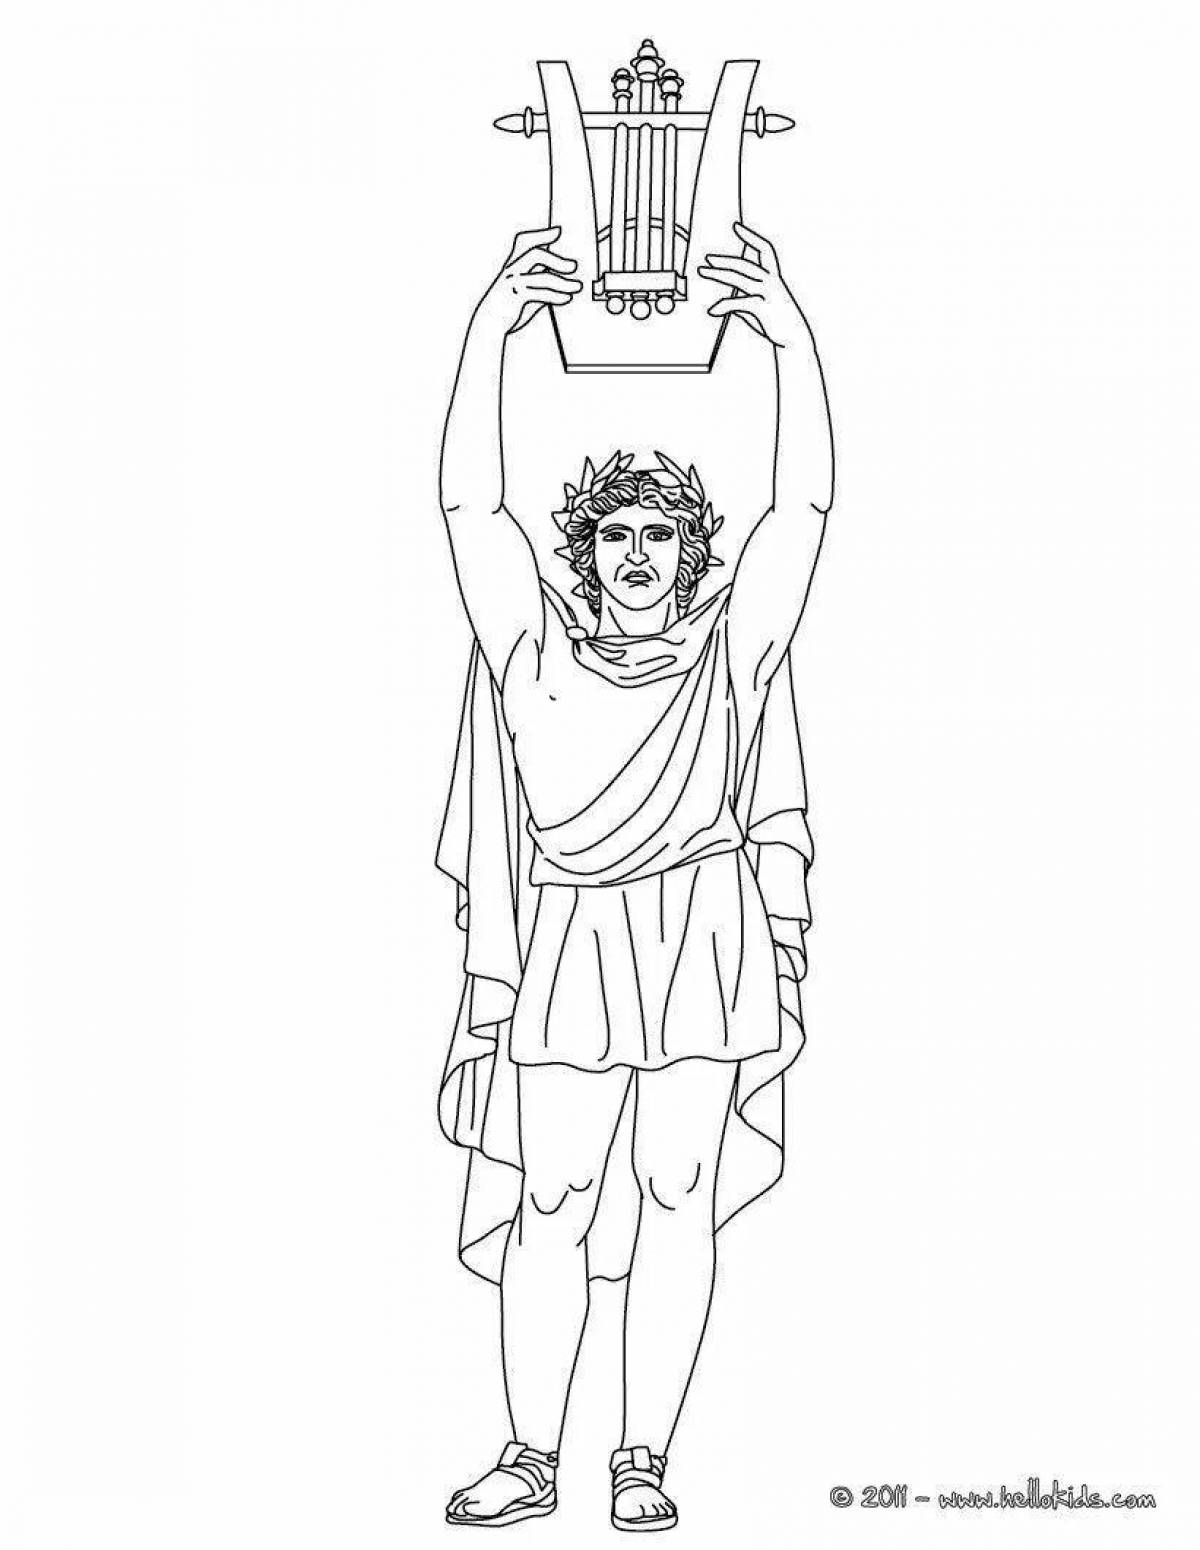 Glorious greece coloring page